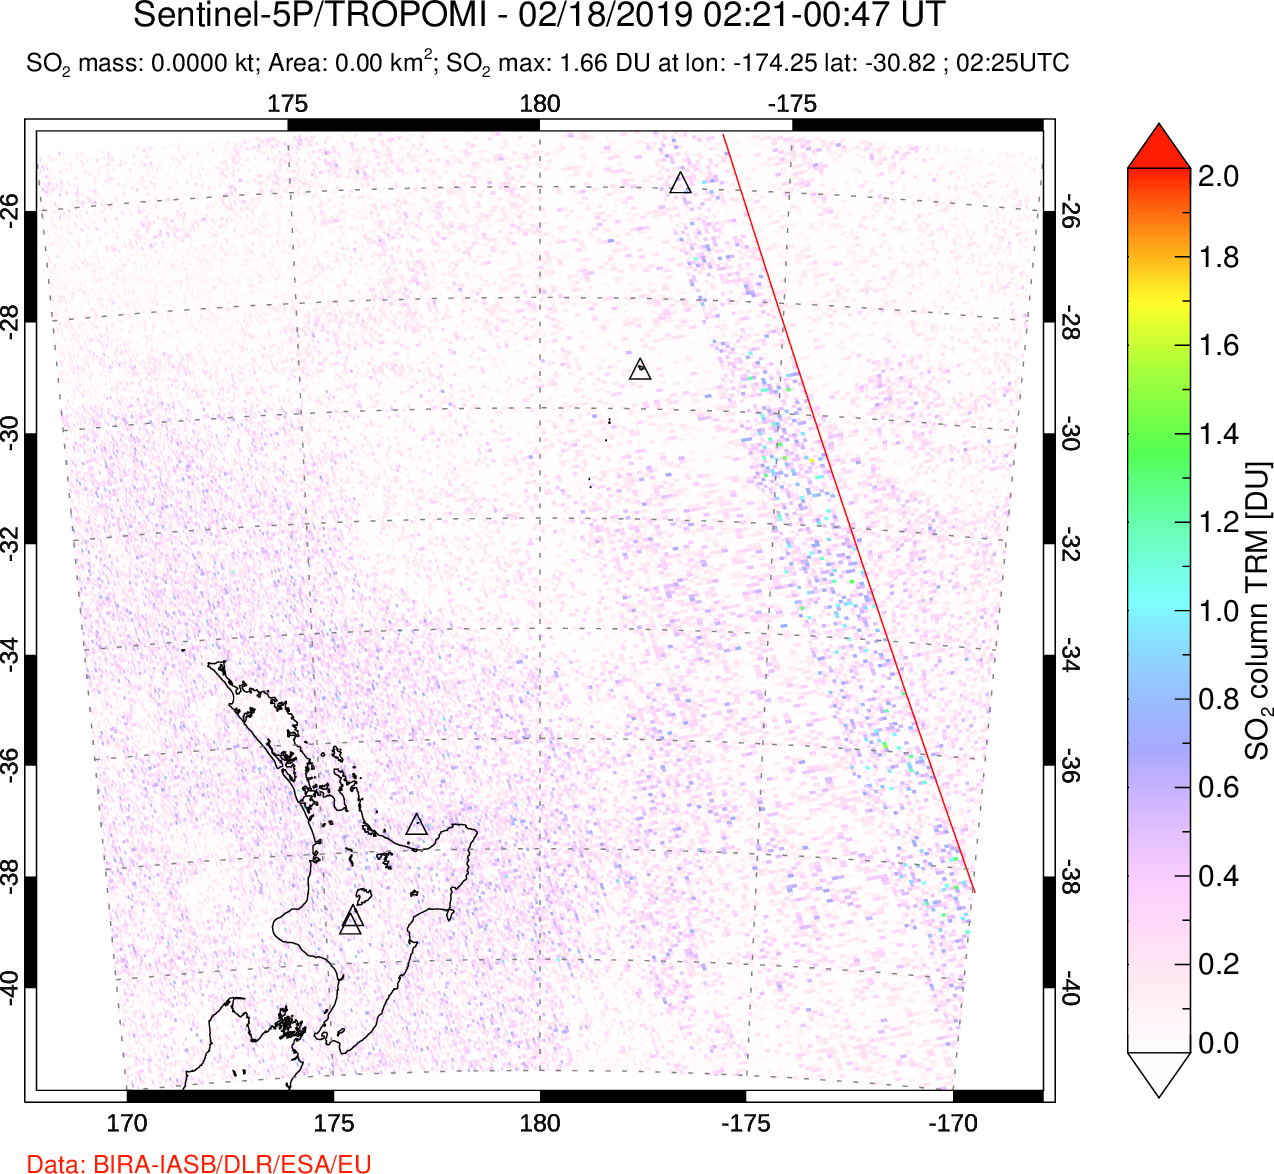 A sulfur dioxide image over New Zealand on Feb 18, 2019.